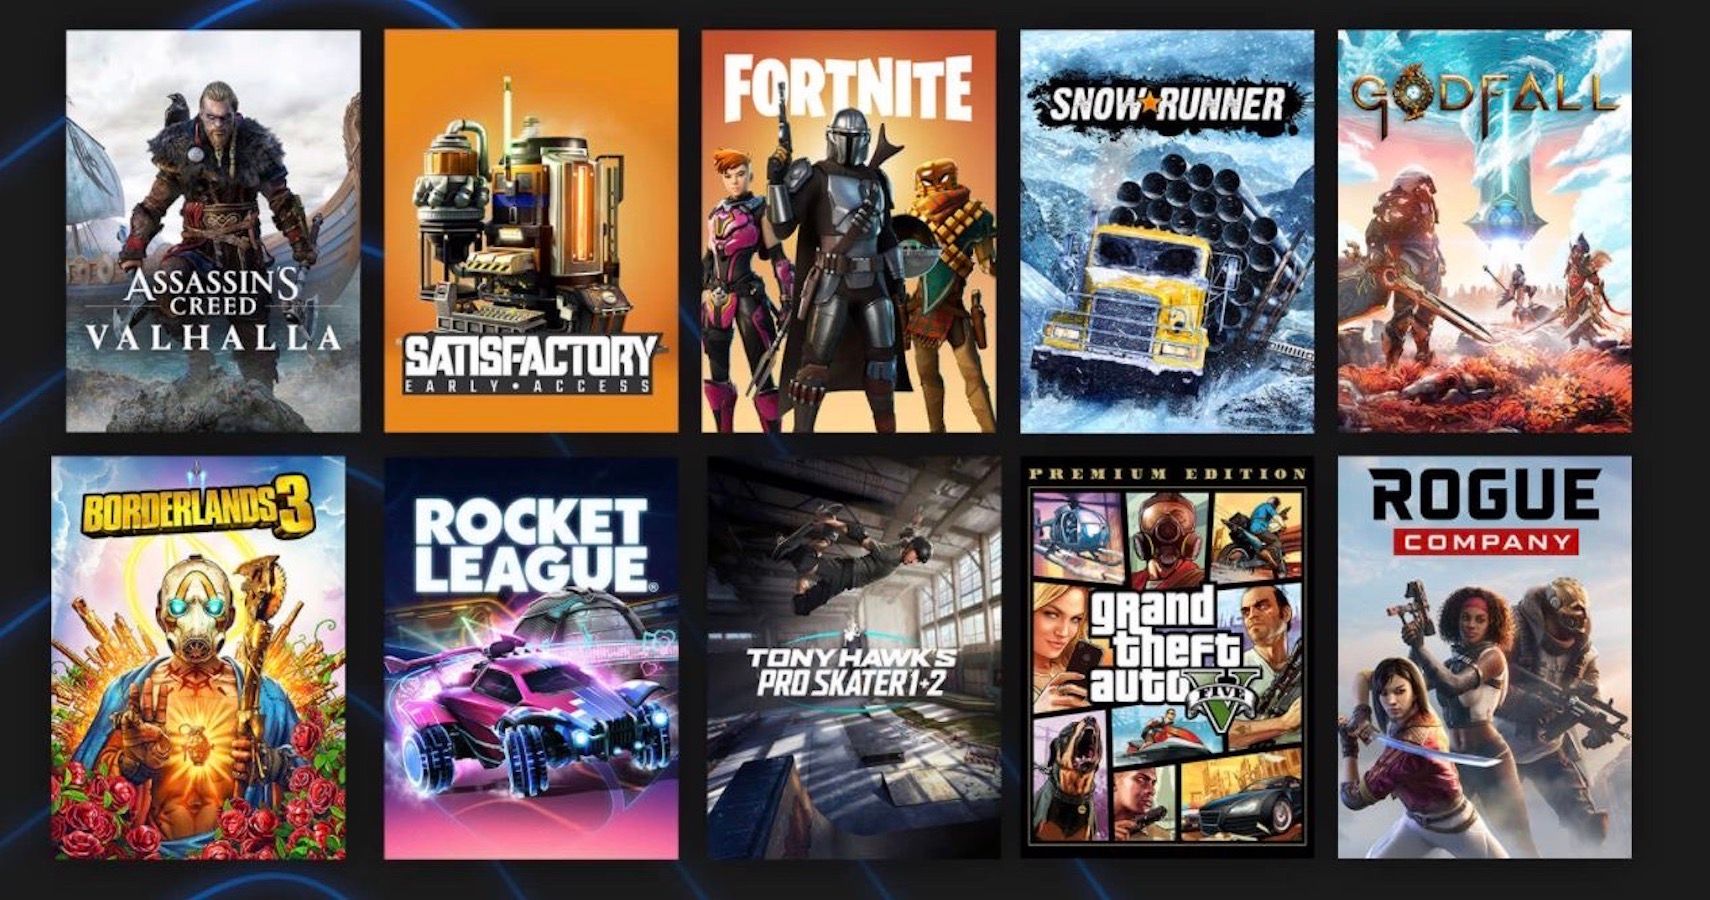 Why I turned down exclusivity deal from the Epic Games Store